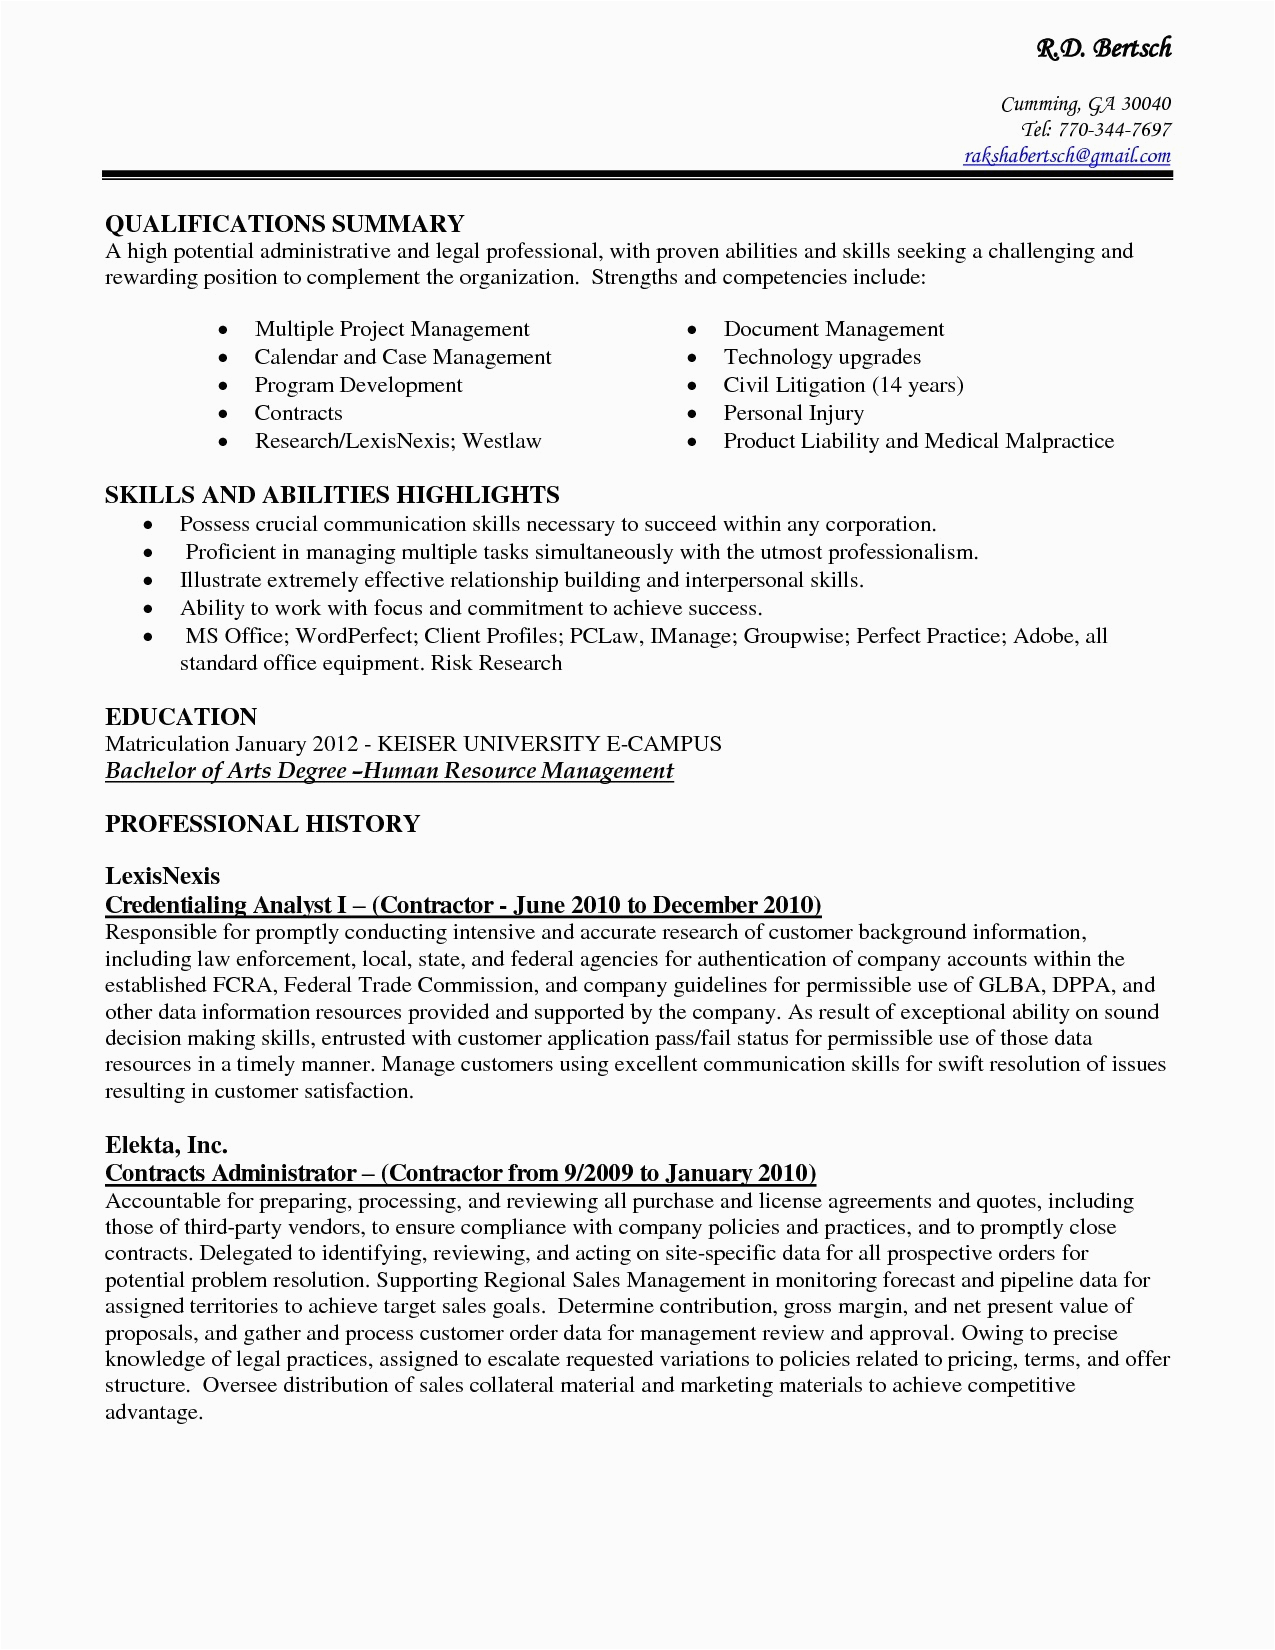 Executive assistant Summary Of Qualifications Sample Resume Pin On Admin Resume